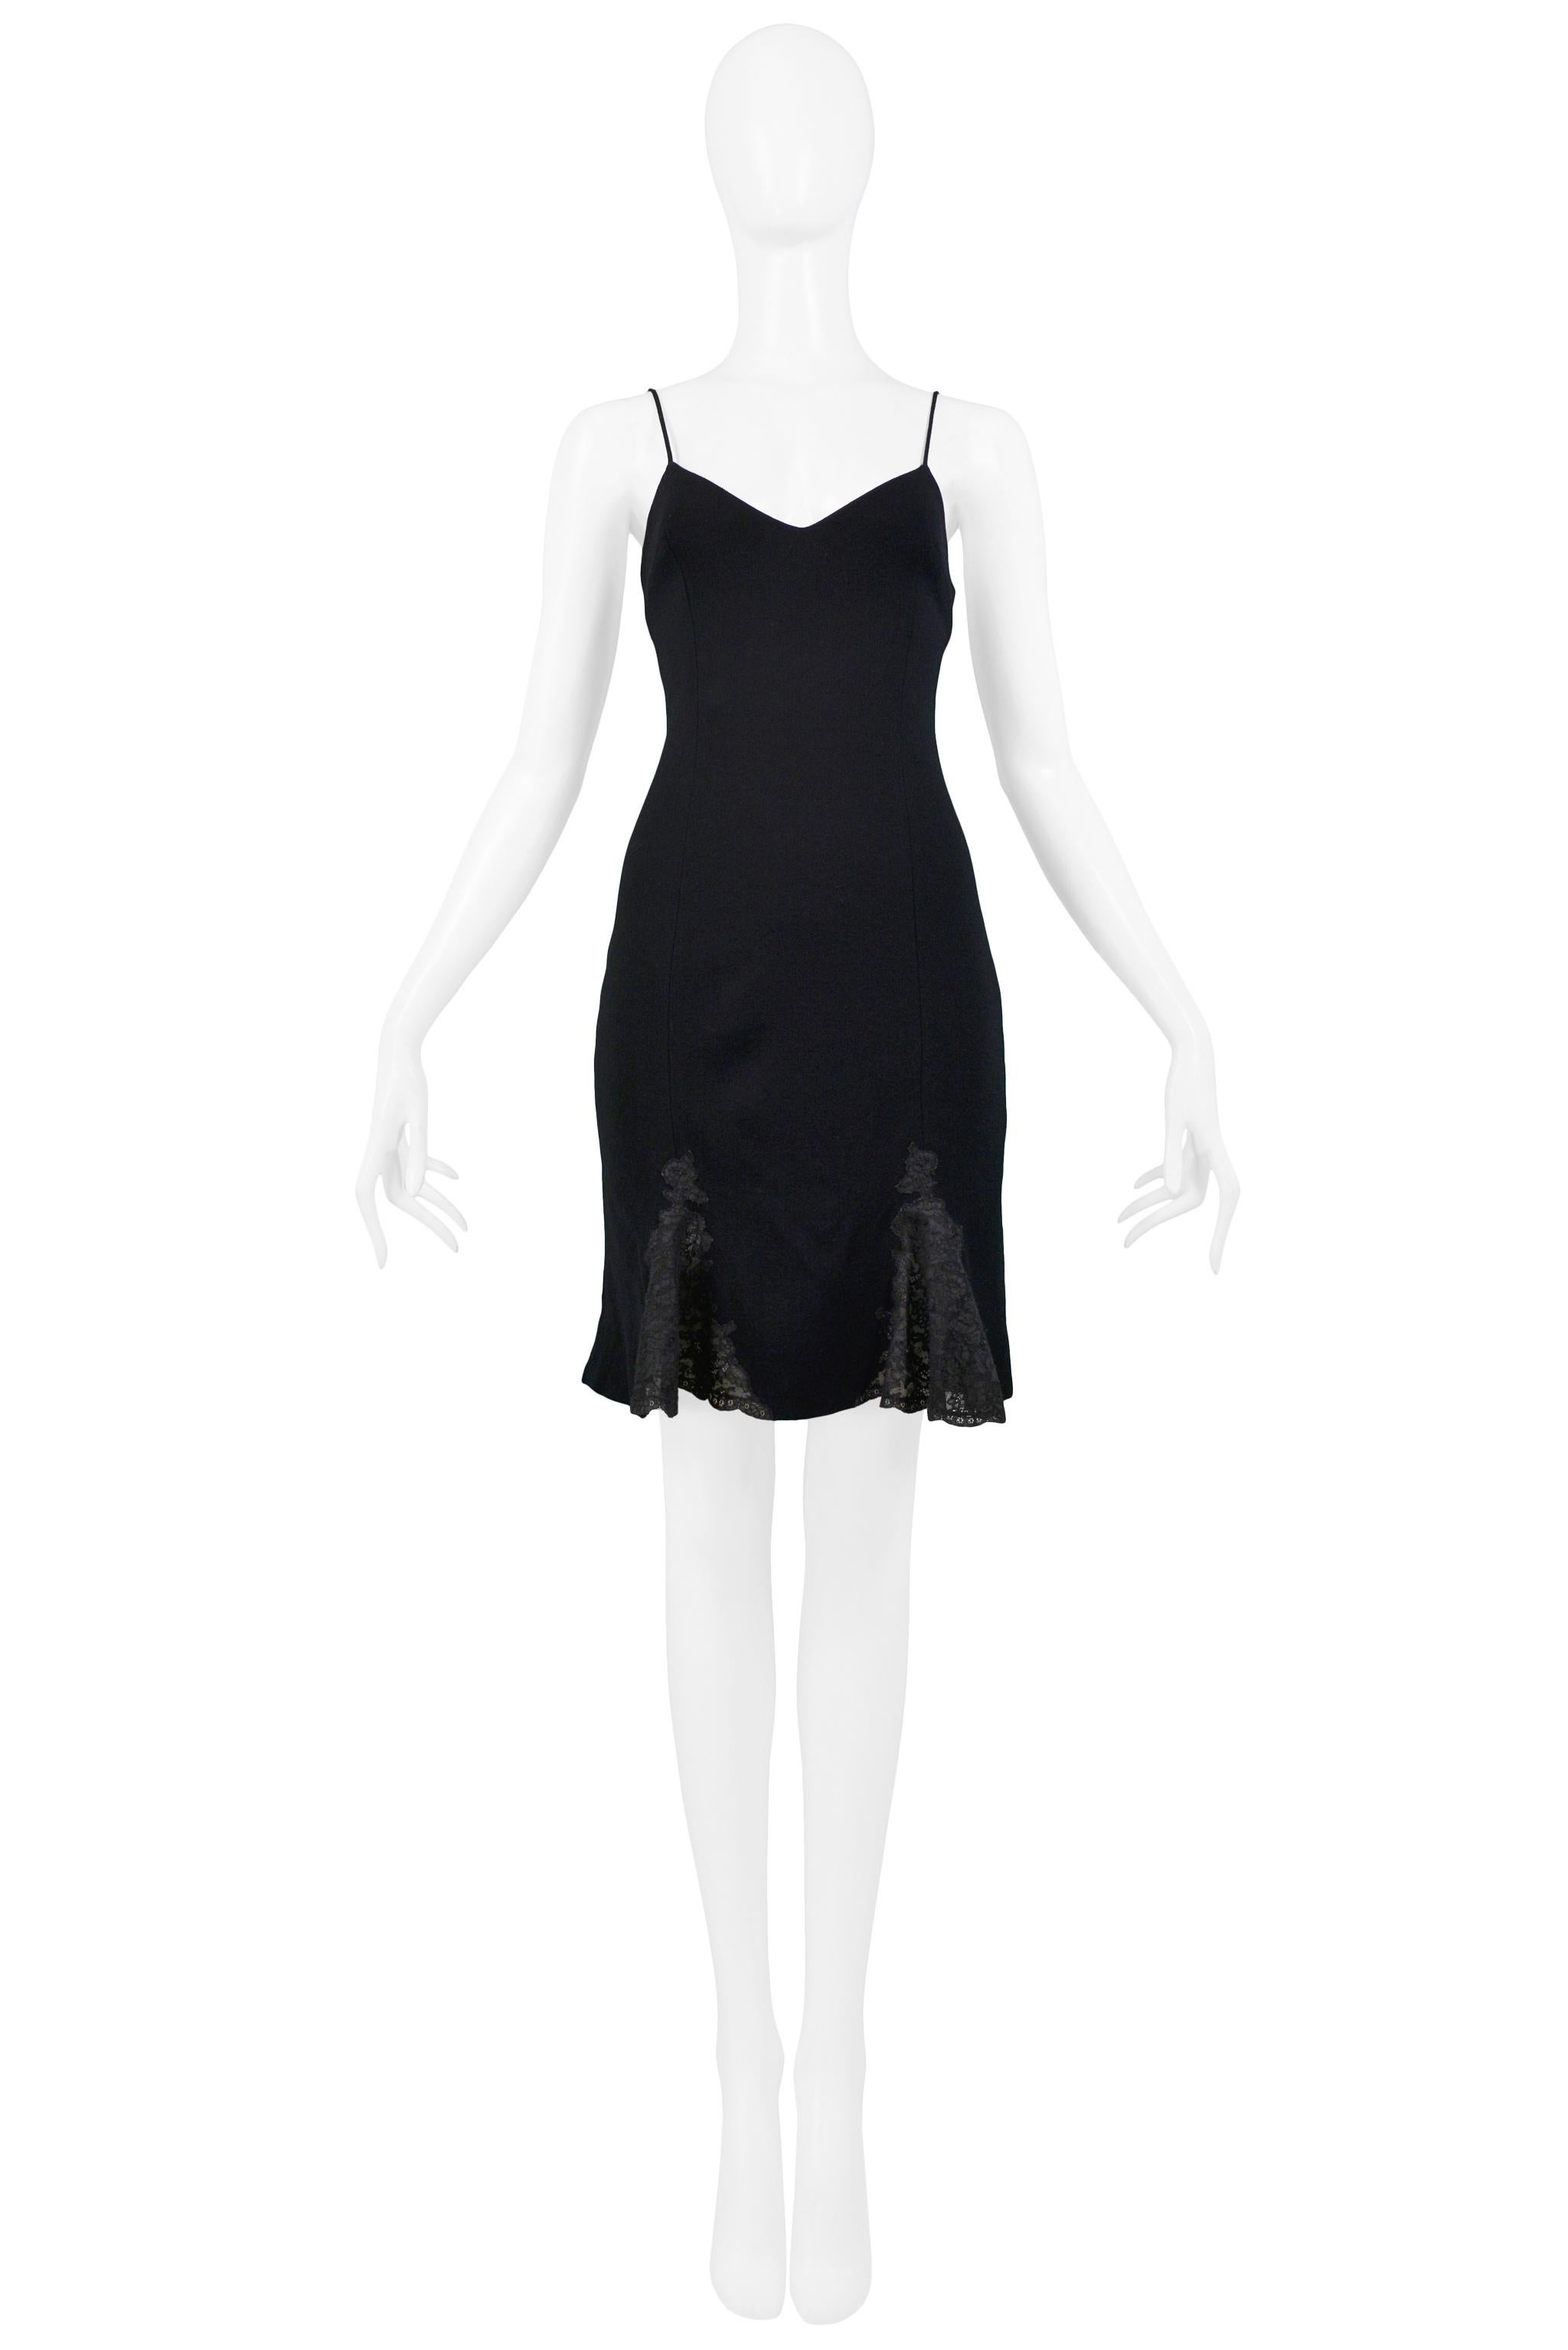 Resurrection is excited to offer this vintage Christian Dior black silk dress featuring a sweetheart neckline, spaghetti straps, and black lace godets at the hem.

Christian Dior Paris
Designed by John Galliano
Size 40
Silk
Excellent Vintage